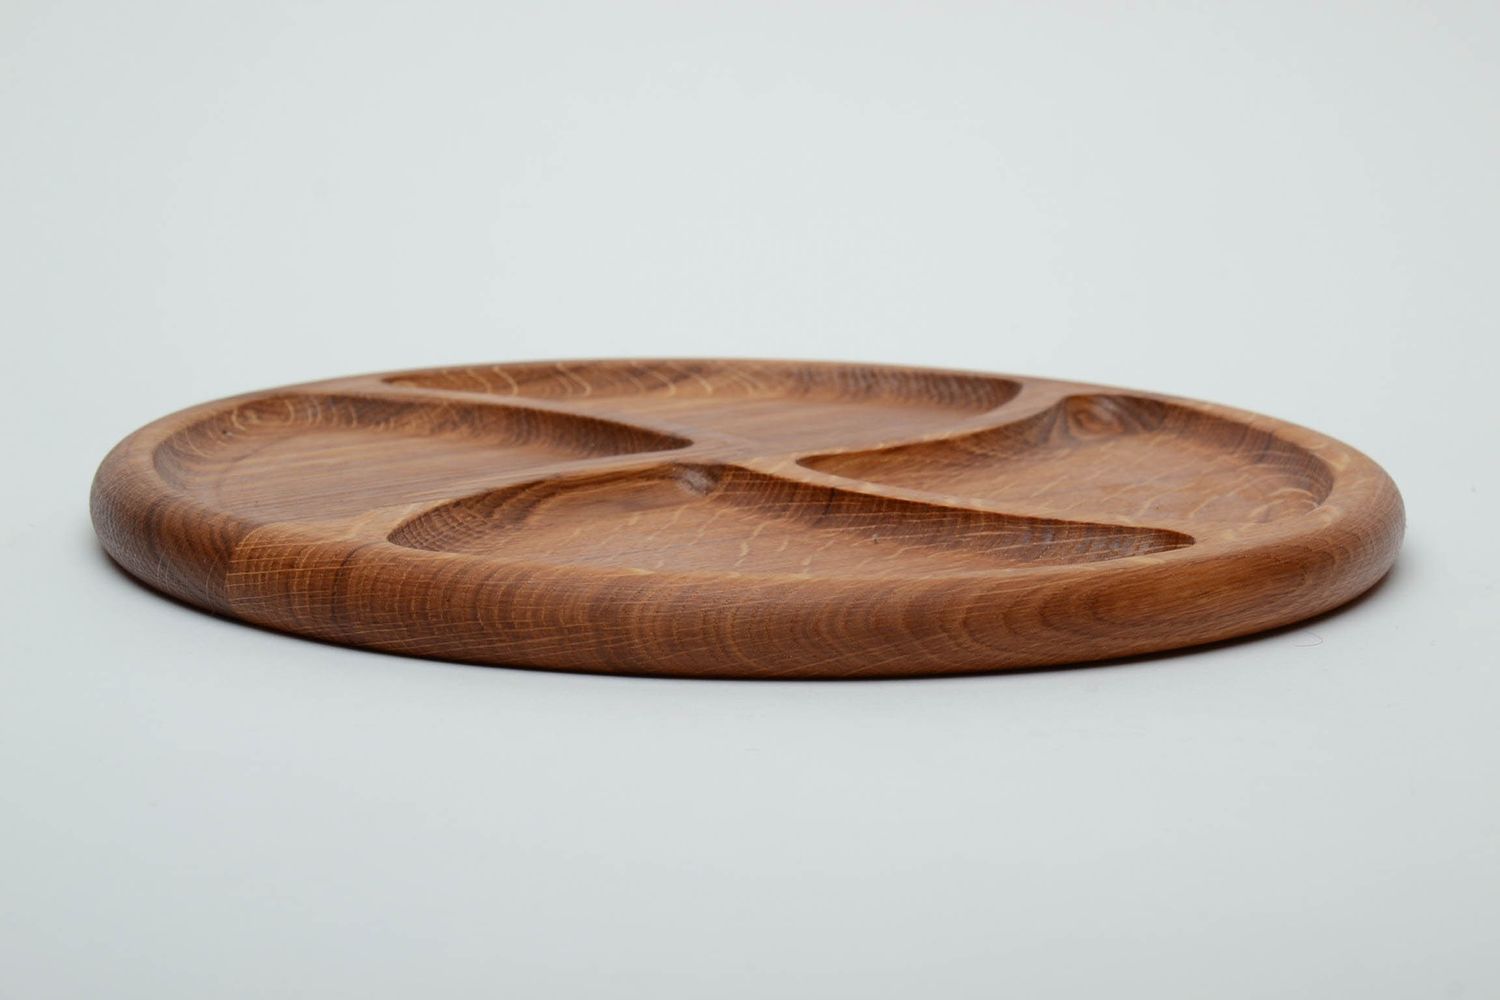 Wooden compartmental dish with 4 departments covered with linseed oil photo 2